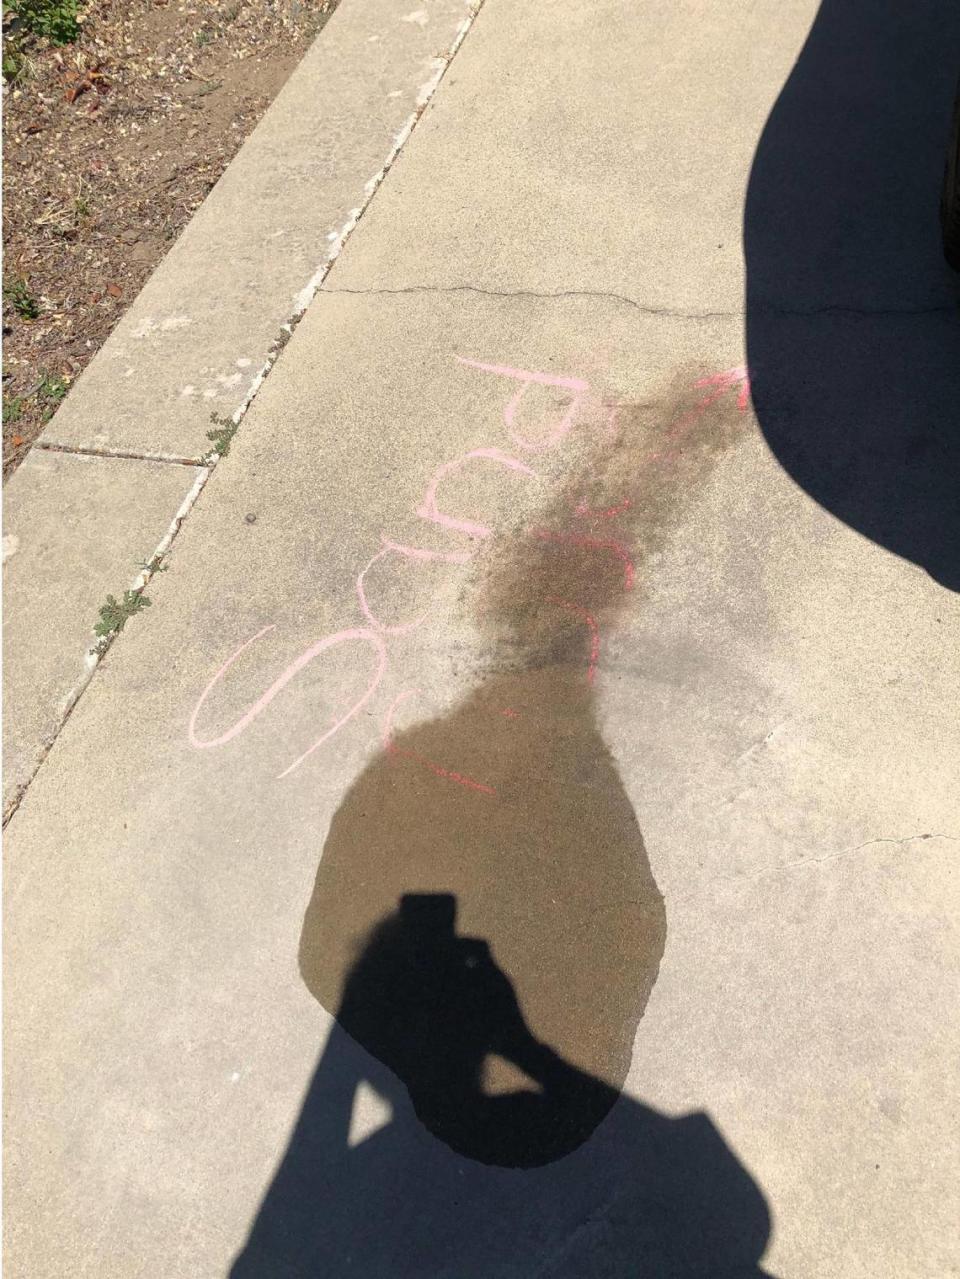 A racial slur written on the driveway of Rouble Claire’s home in Sutter, California, on May 11, 2021. Claire says a Sutter County sheriff’s deputy partially washed away the slur with his water bottle without taking any photos of the chalk as evidence. Courtesy of Rouble Claire